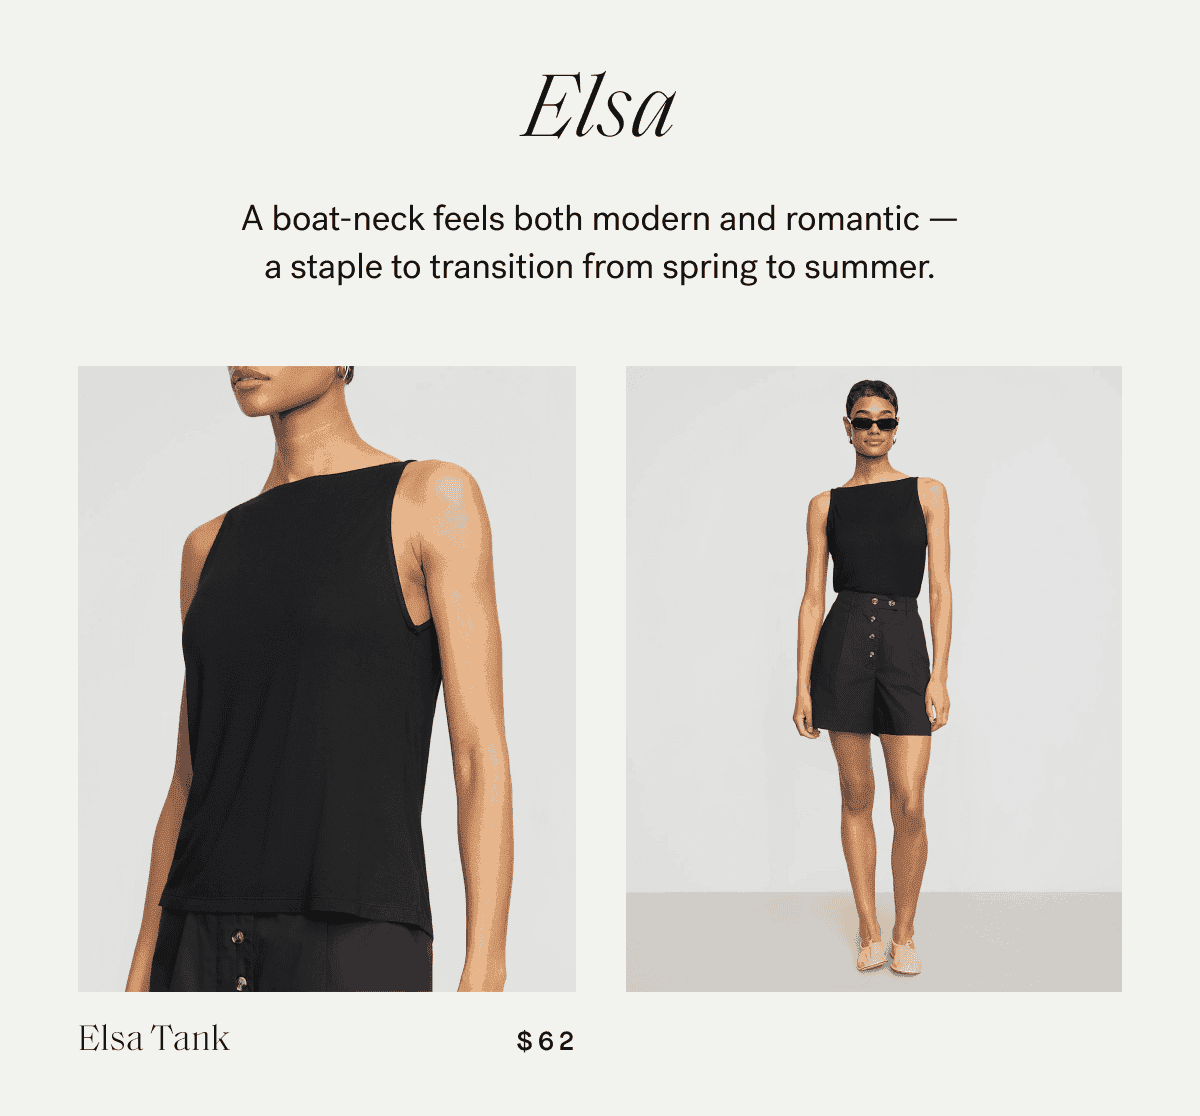 Elsa —\xa0A boat-neck feels both modern and romantic — a staple to transition from spring to summer.